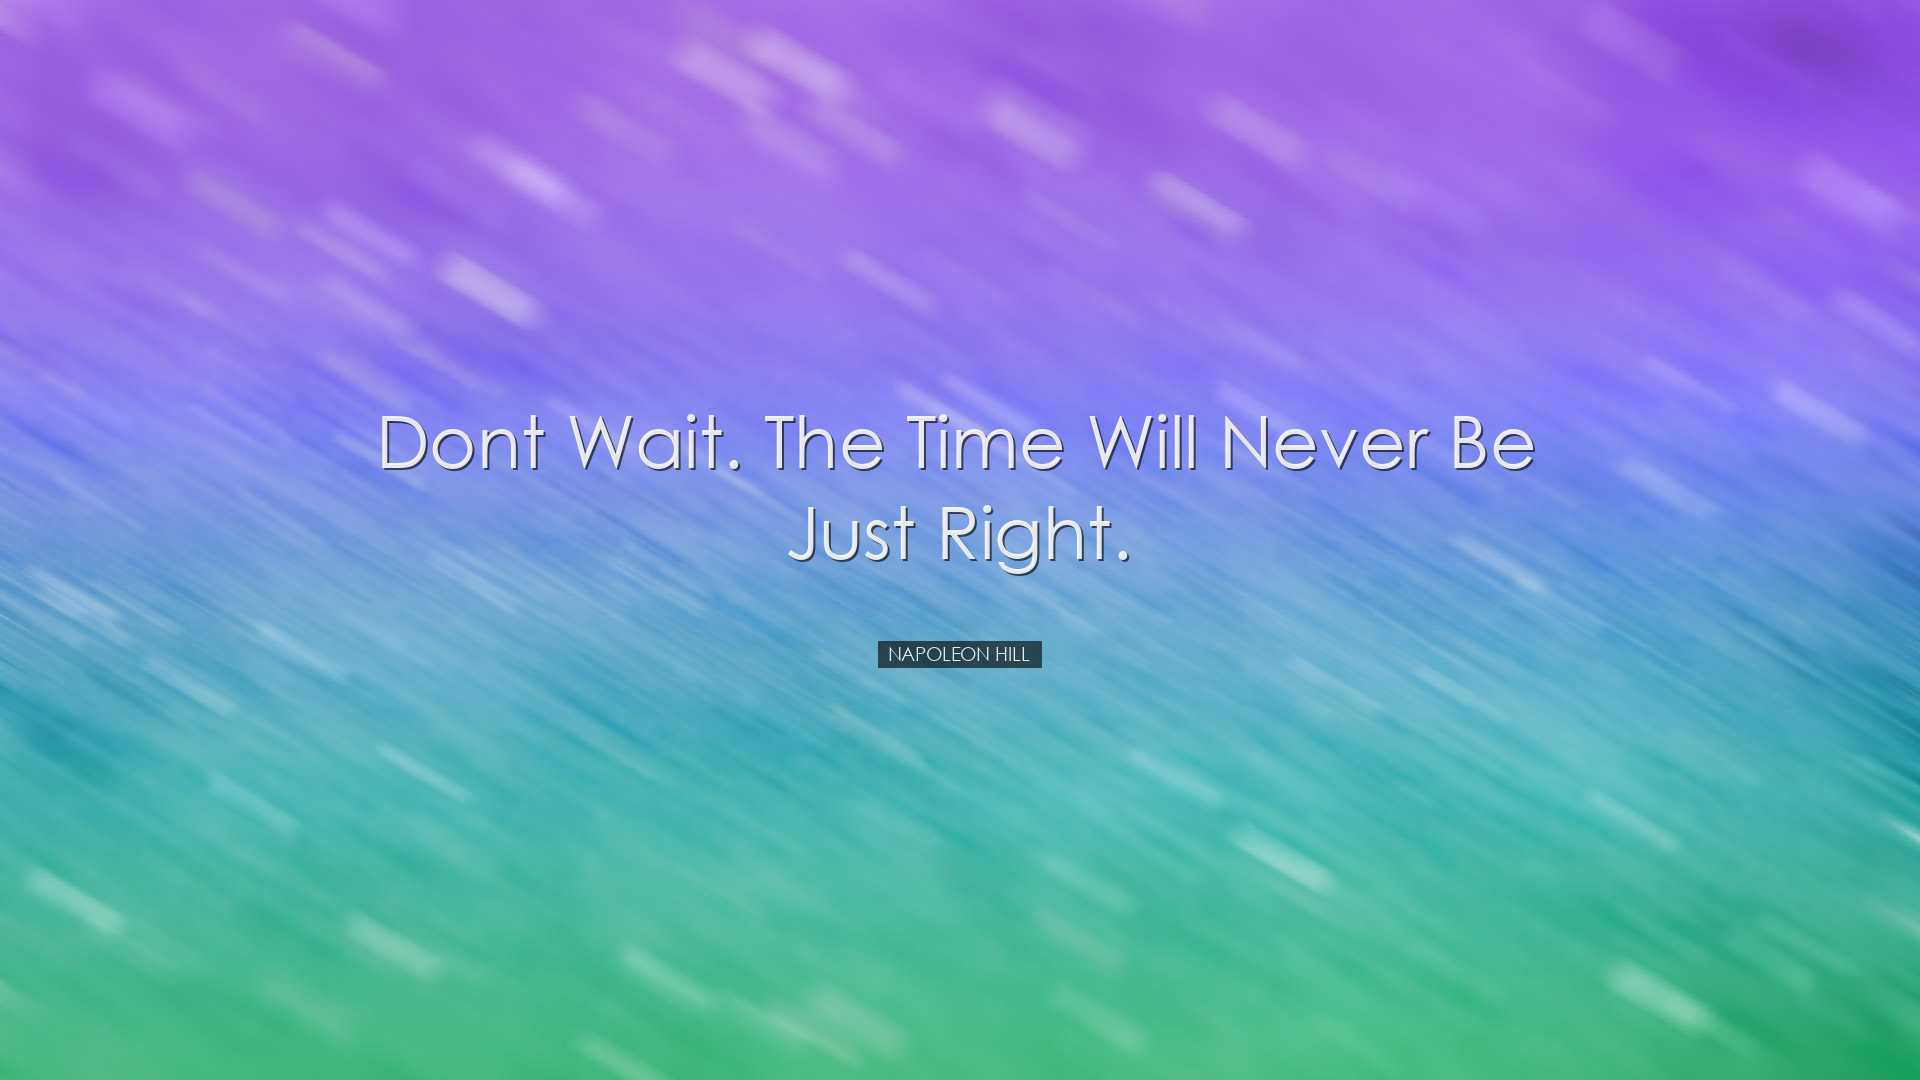 Dont wait. The time will never be just right. - Napoleon Hill